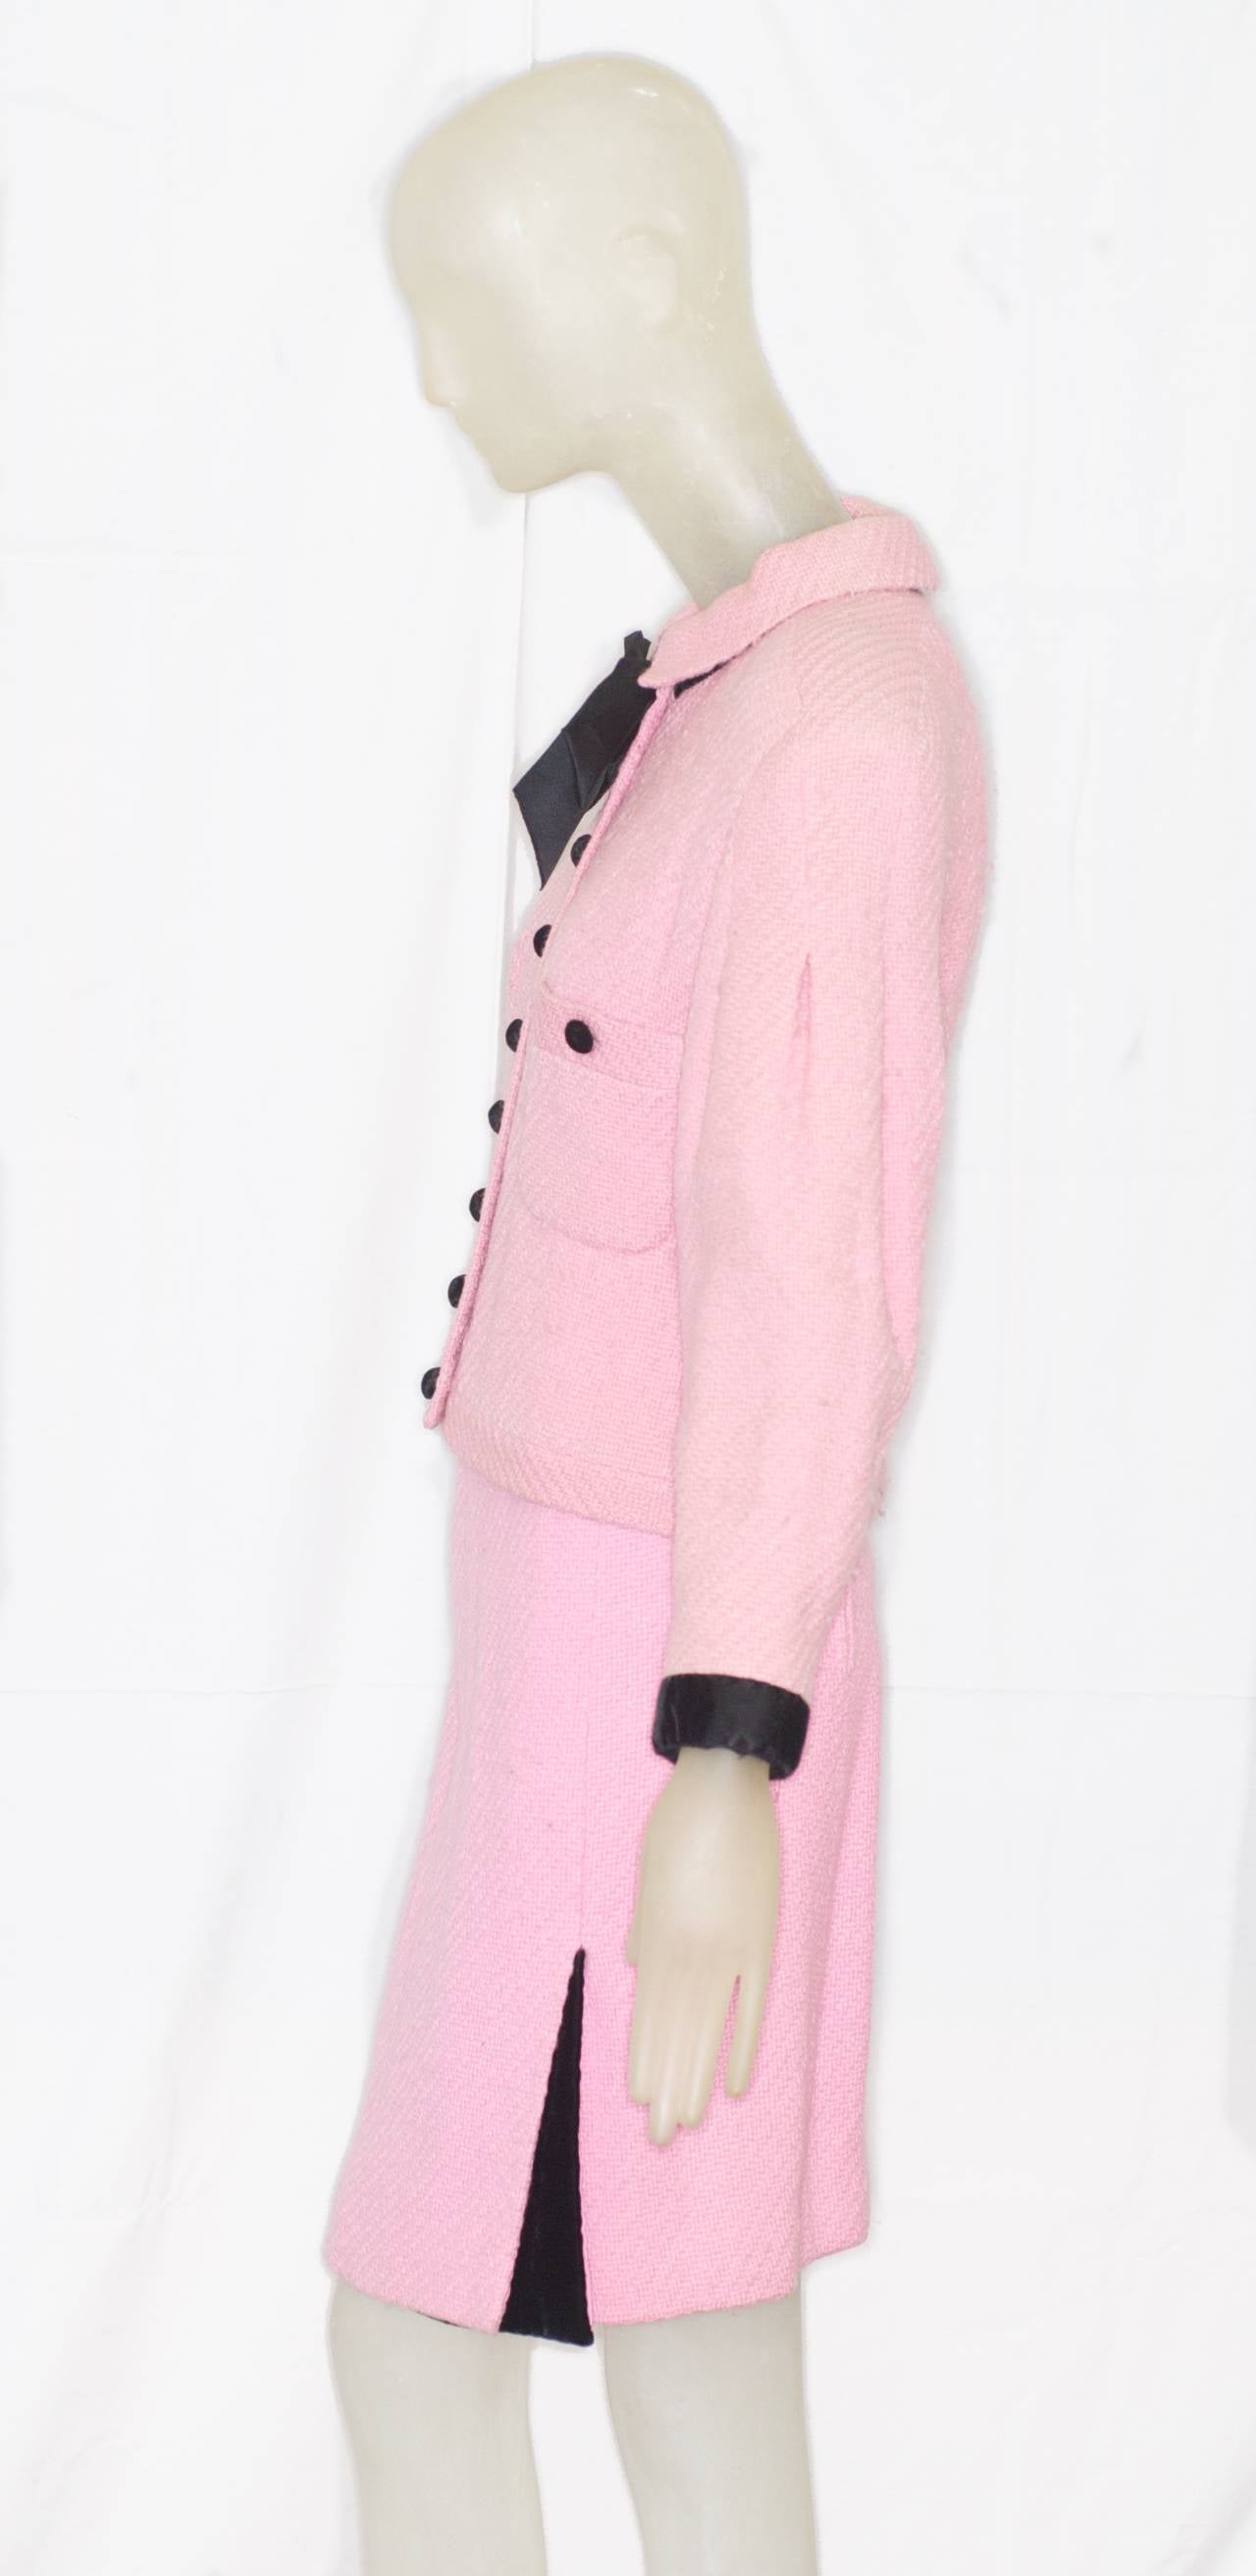 Chanel Haute Couture Pink Jacket and Skirt For Sale 1